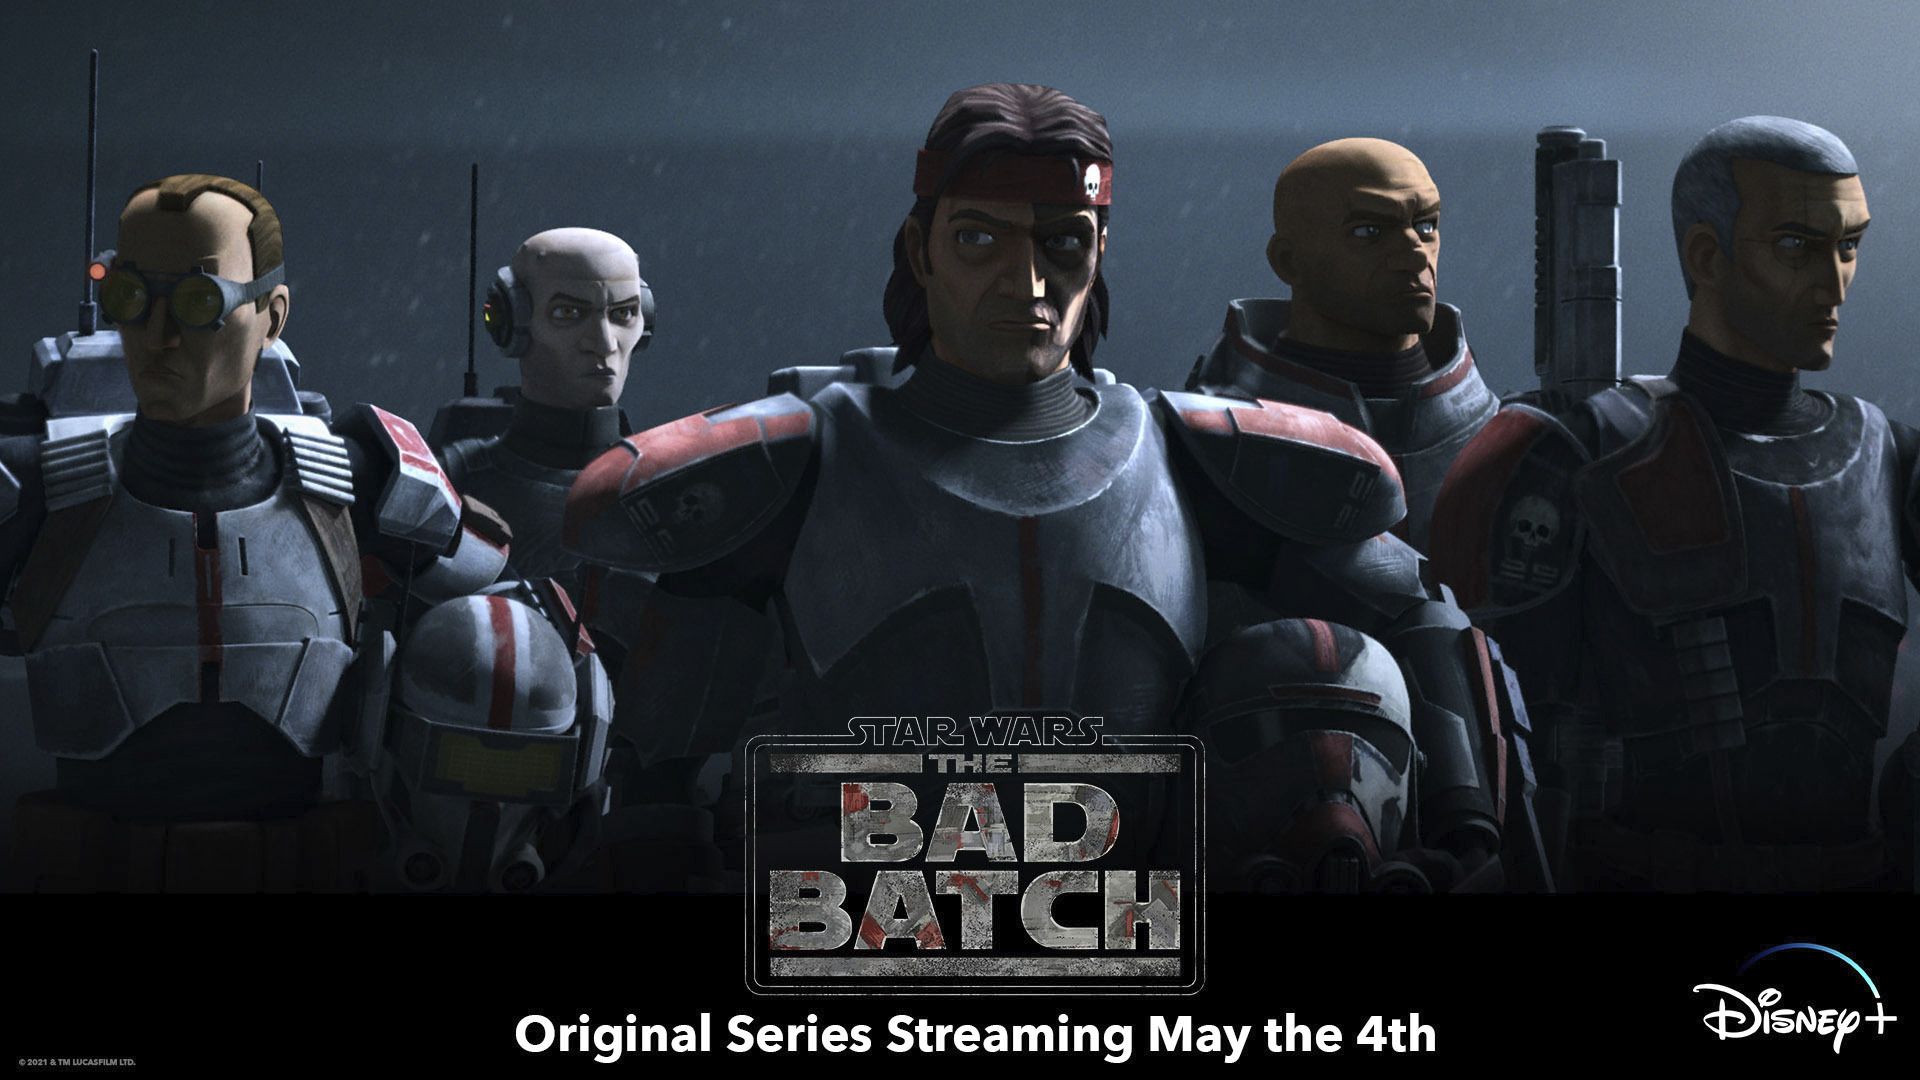 Star Wars Wars: The Bad Batch, an Original Series, starts streaming May the 4th